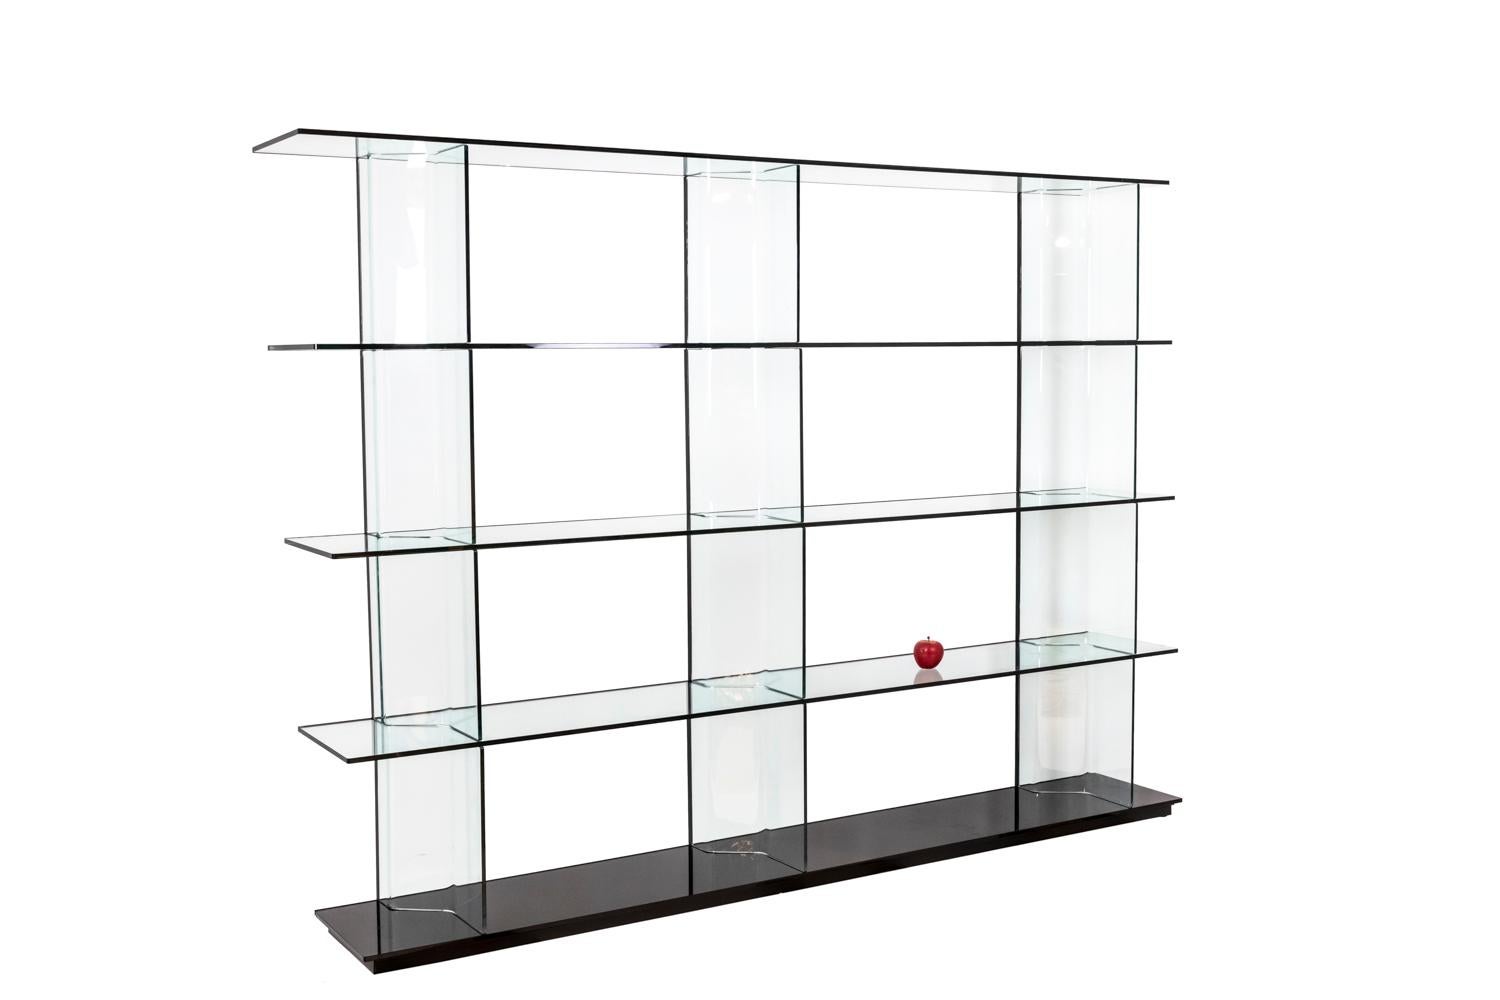 Bookcase composed of five selves in transparent glass. Inori model. System composed of modular elements in glass laying on a black rail in aluminum.

Work realized in the 1990's.

Setsu & Shinobu Ito are two Japanese architects and designers.